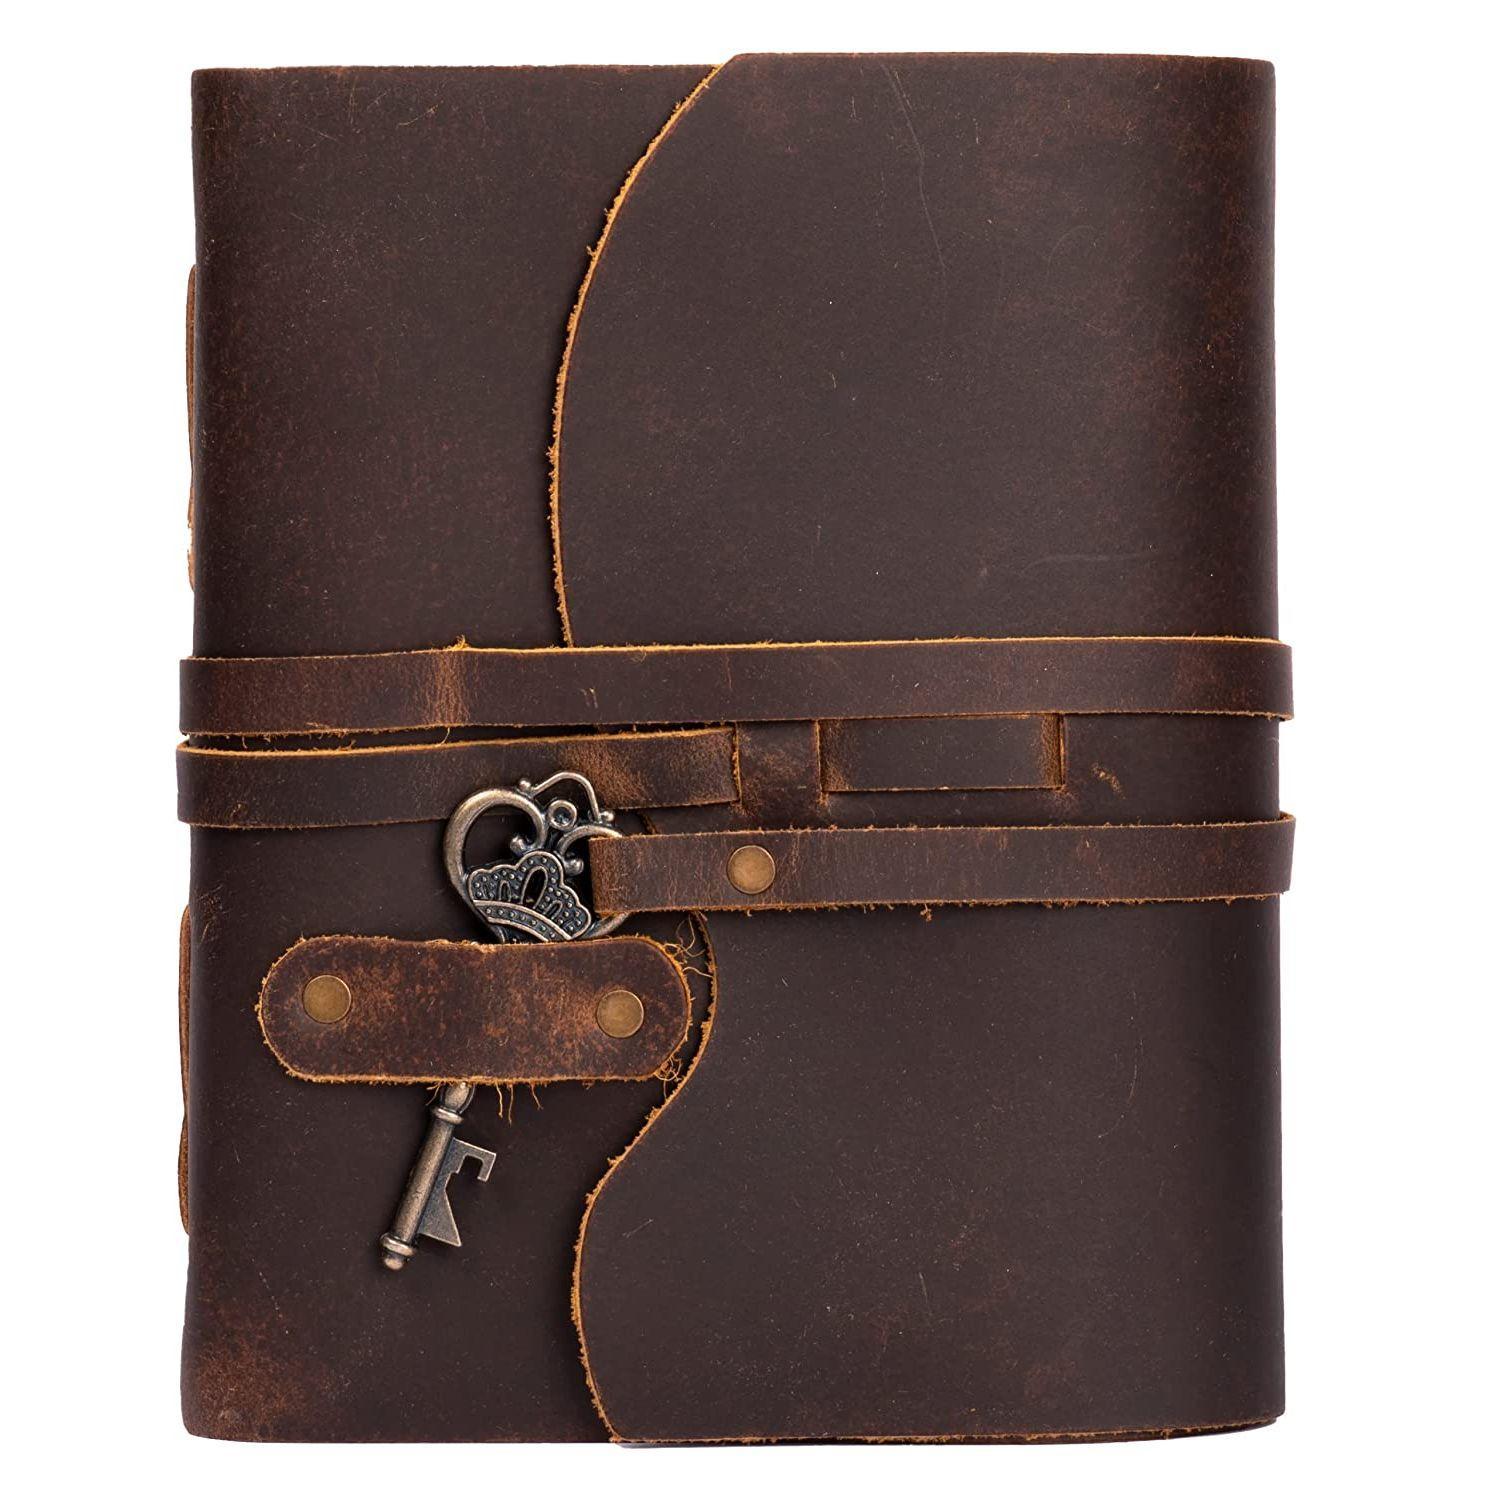 Primary image for Handmade Vintage Leather Diary -Vintage Handmade Pages - Antique Key Closure - C